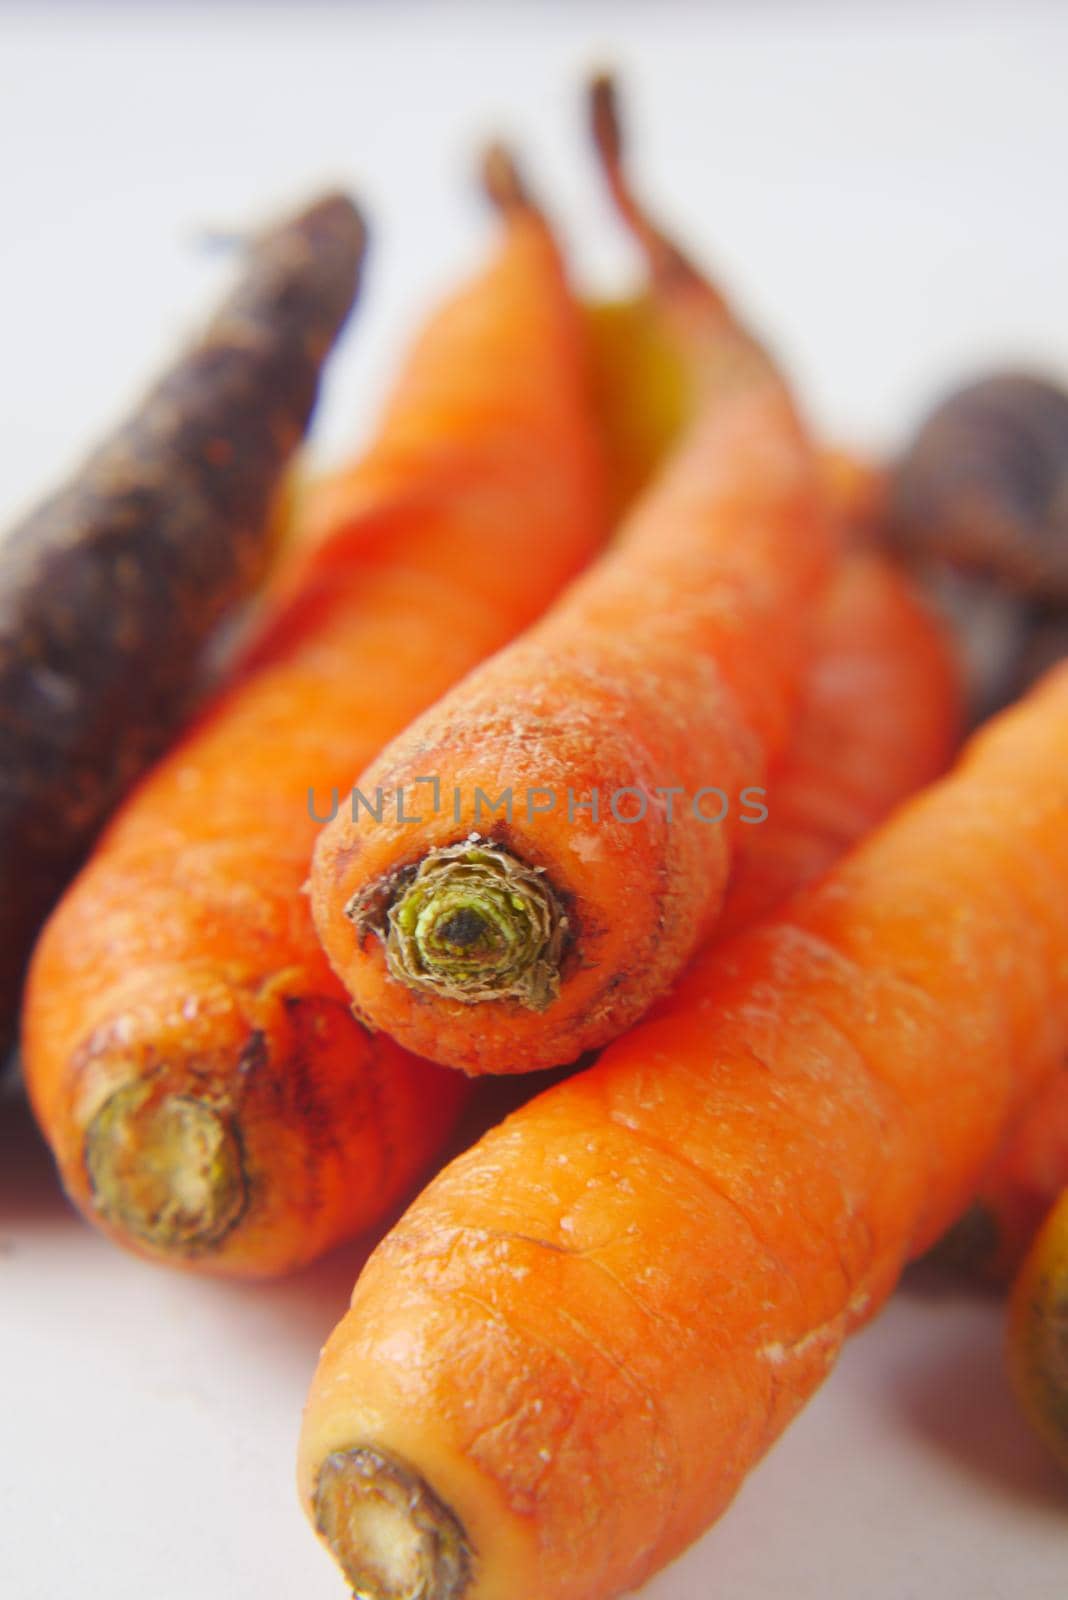 mixed colorful carrot on table close up .